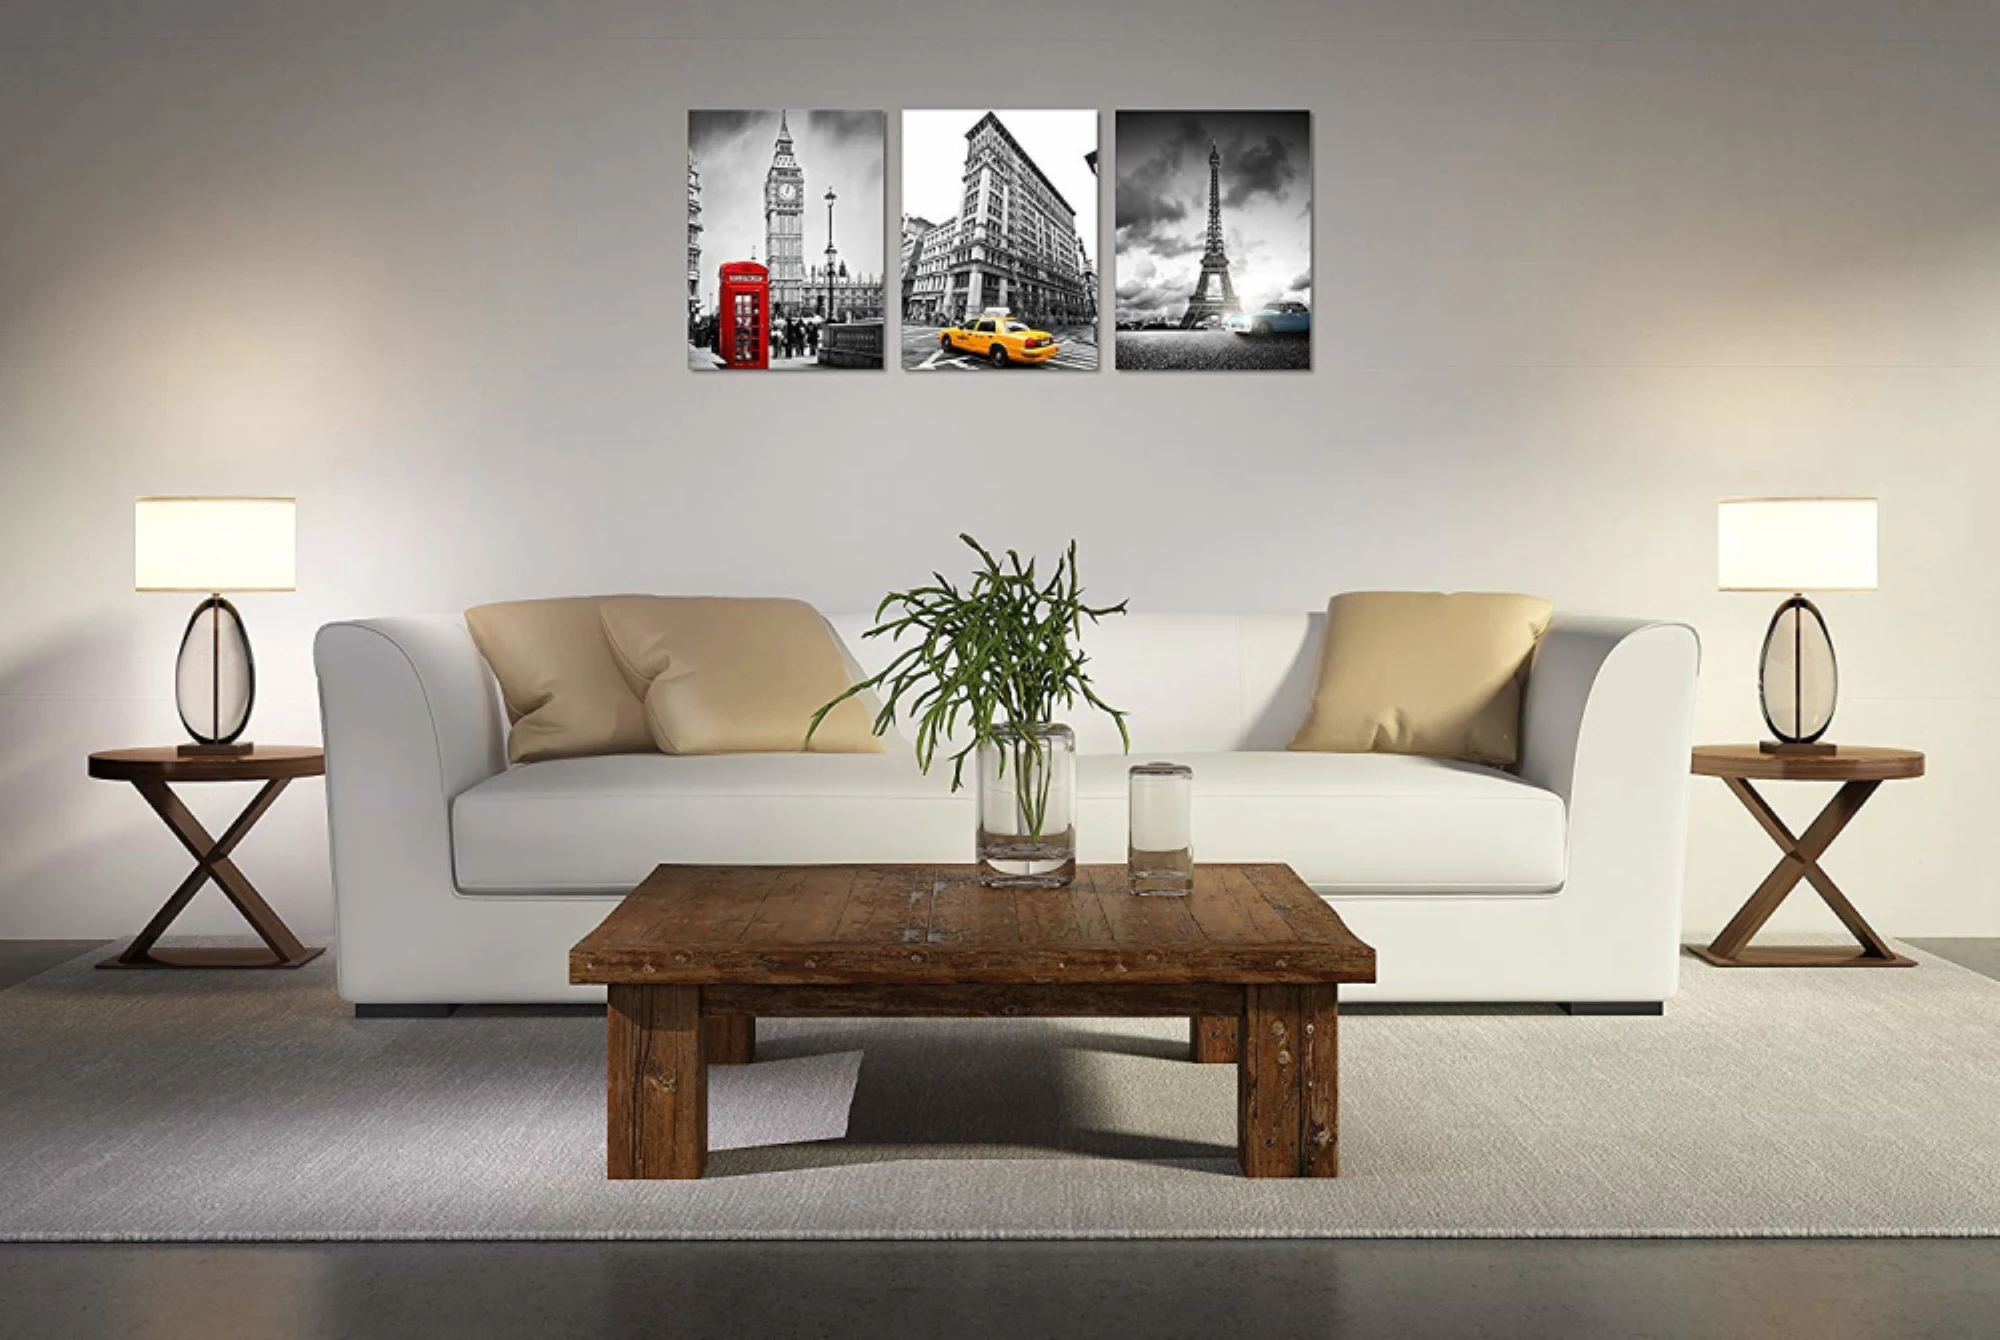 

Framed Black and White Eiffel Tower Canvas Big Ben Red Telephone Booth In London Wall Art Decor Yellow Cab Cityscape Canvas